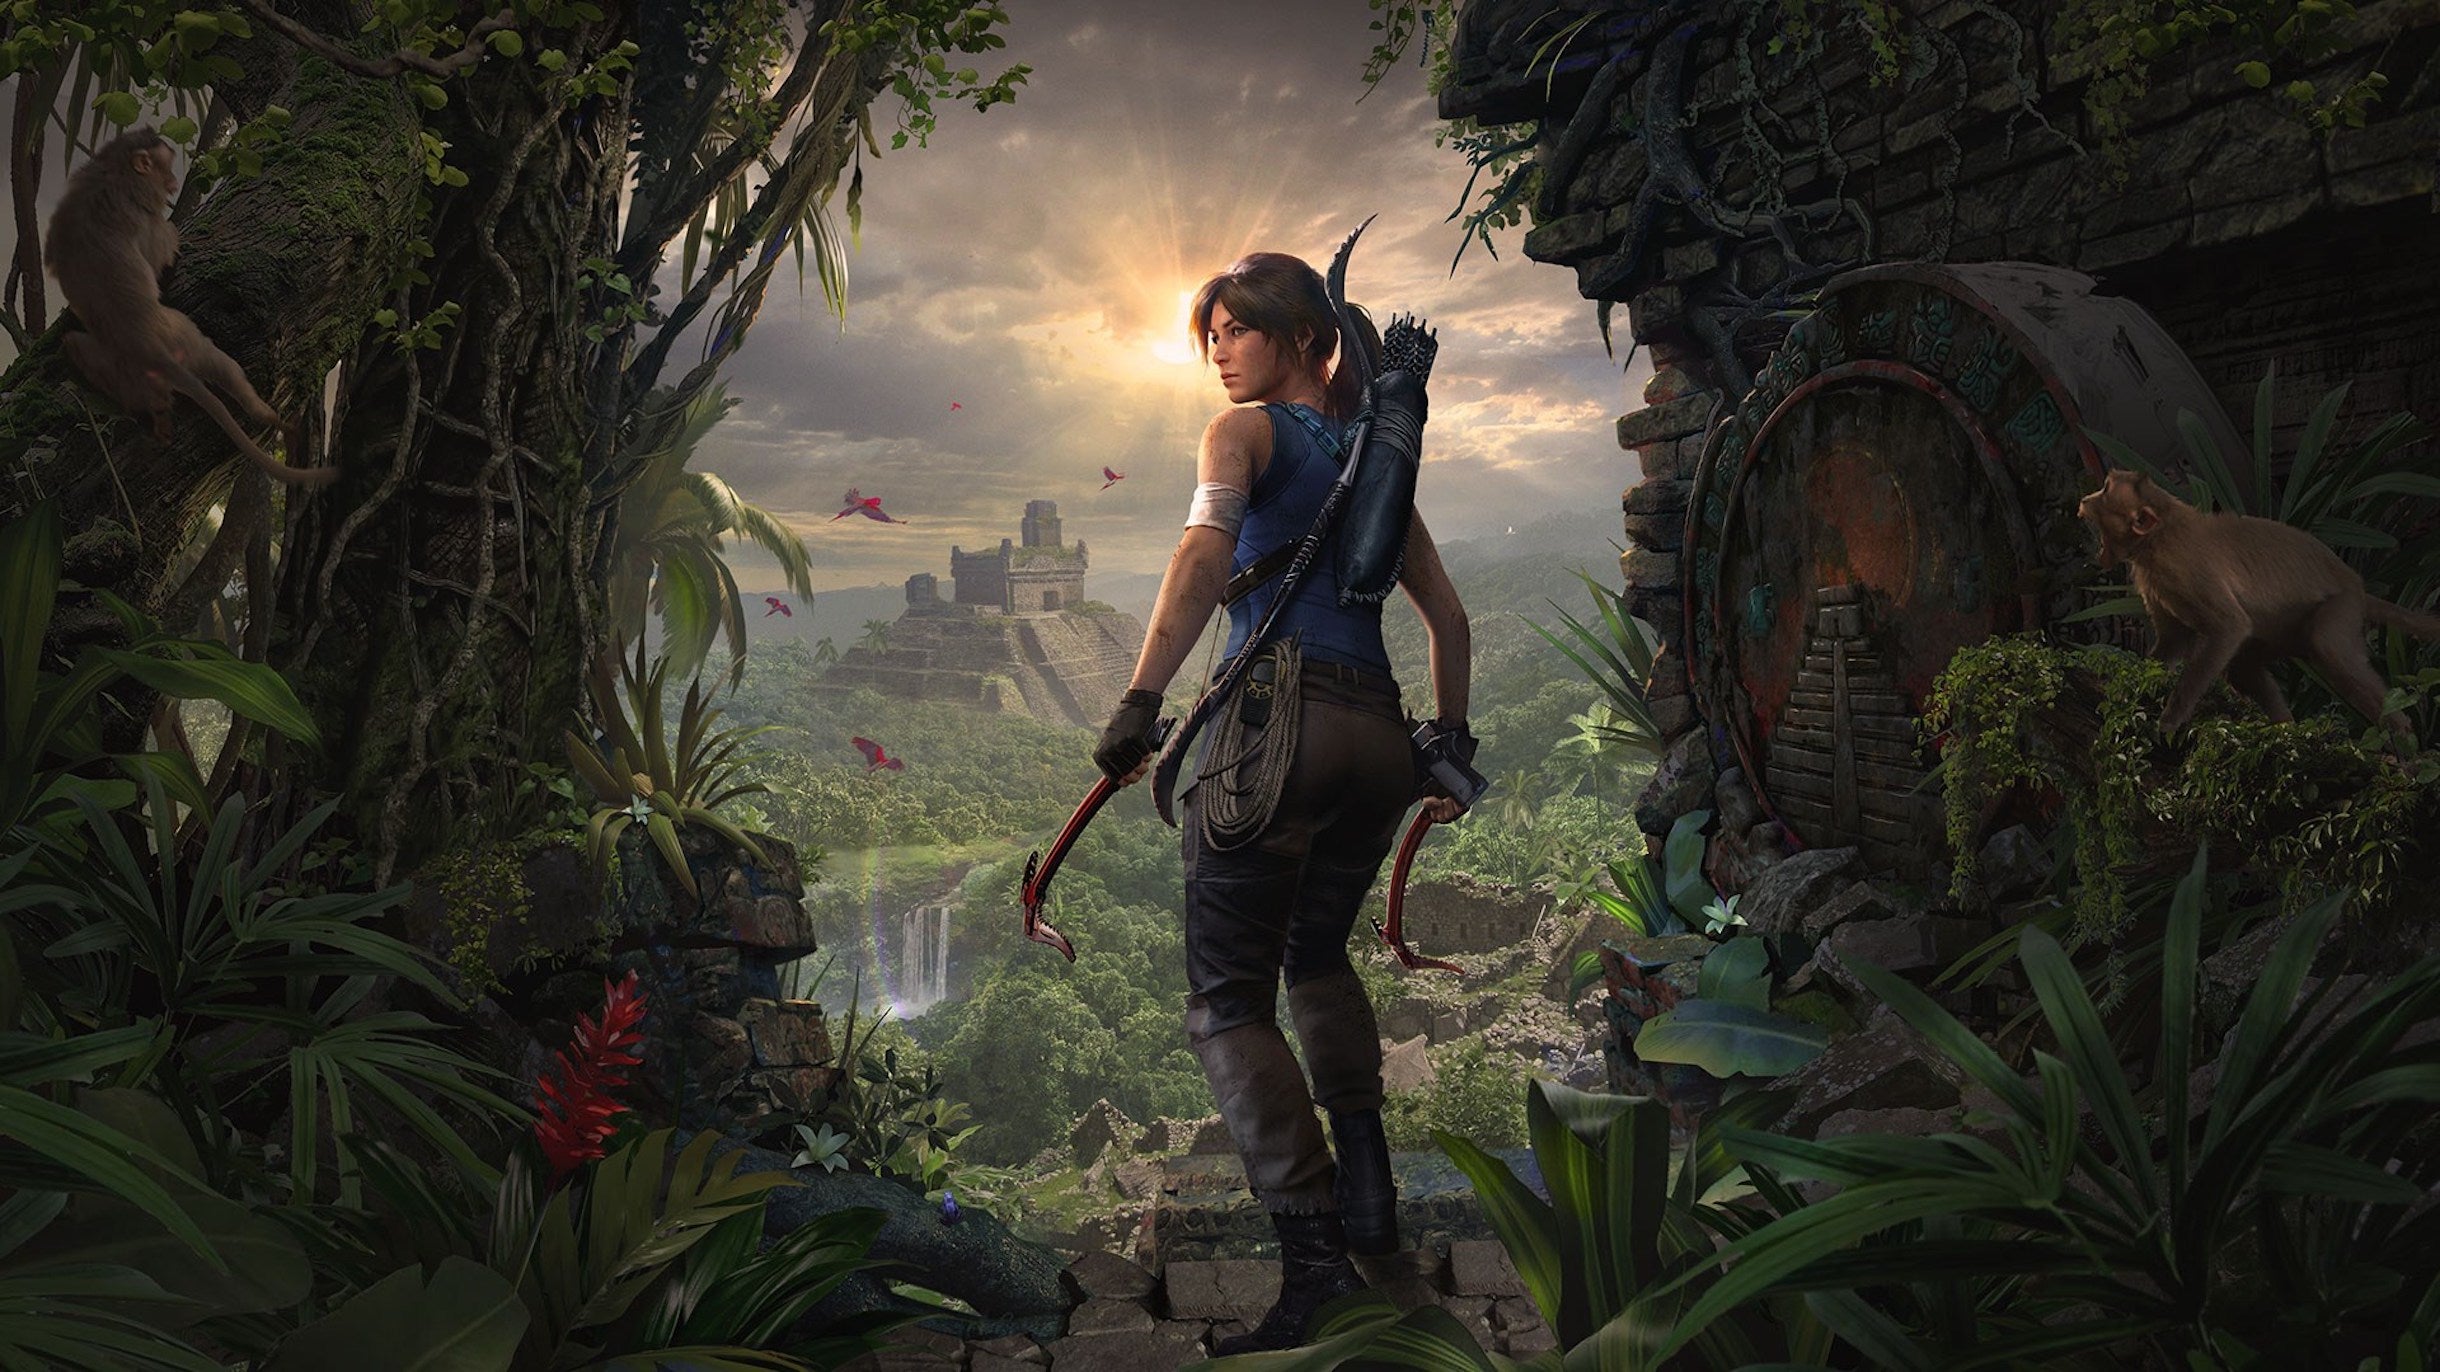 Art from Shadow of the Tomb Raider of Lara looking over her shoulder over a jungle vista.